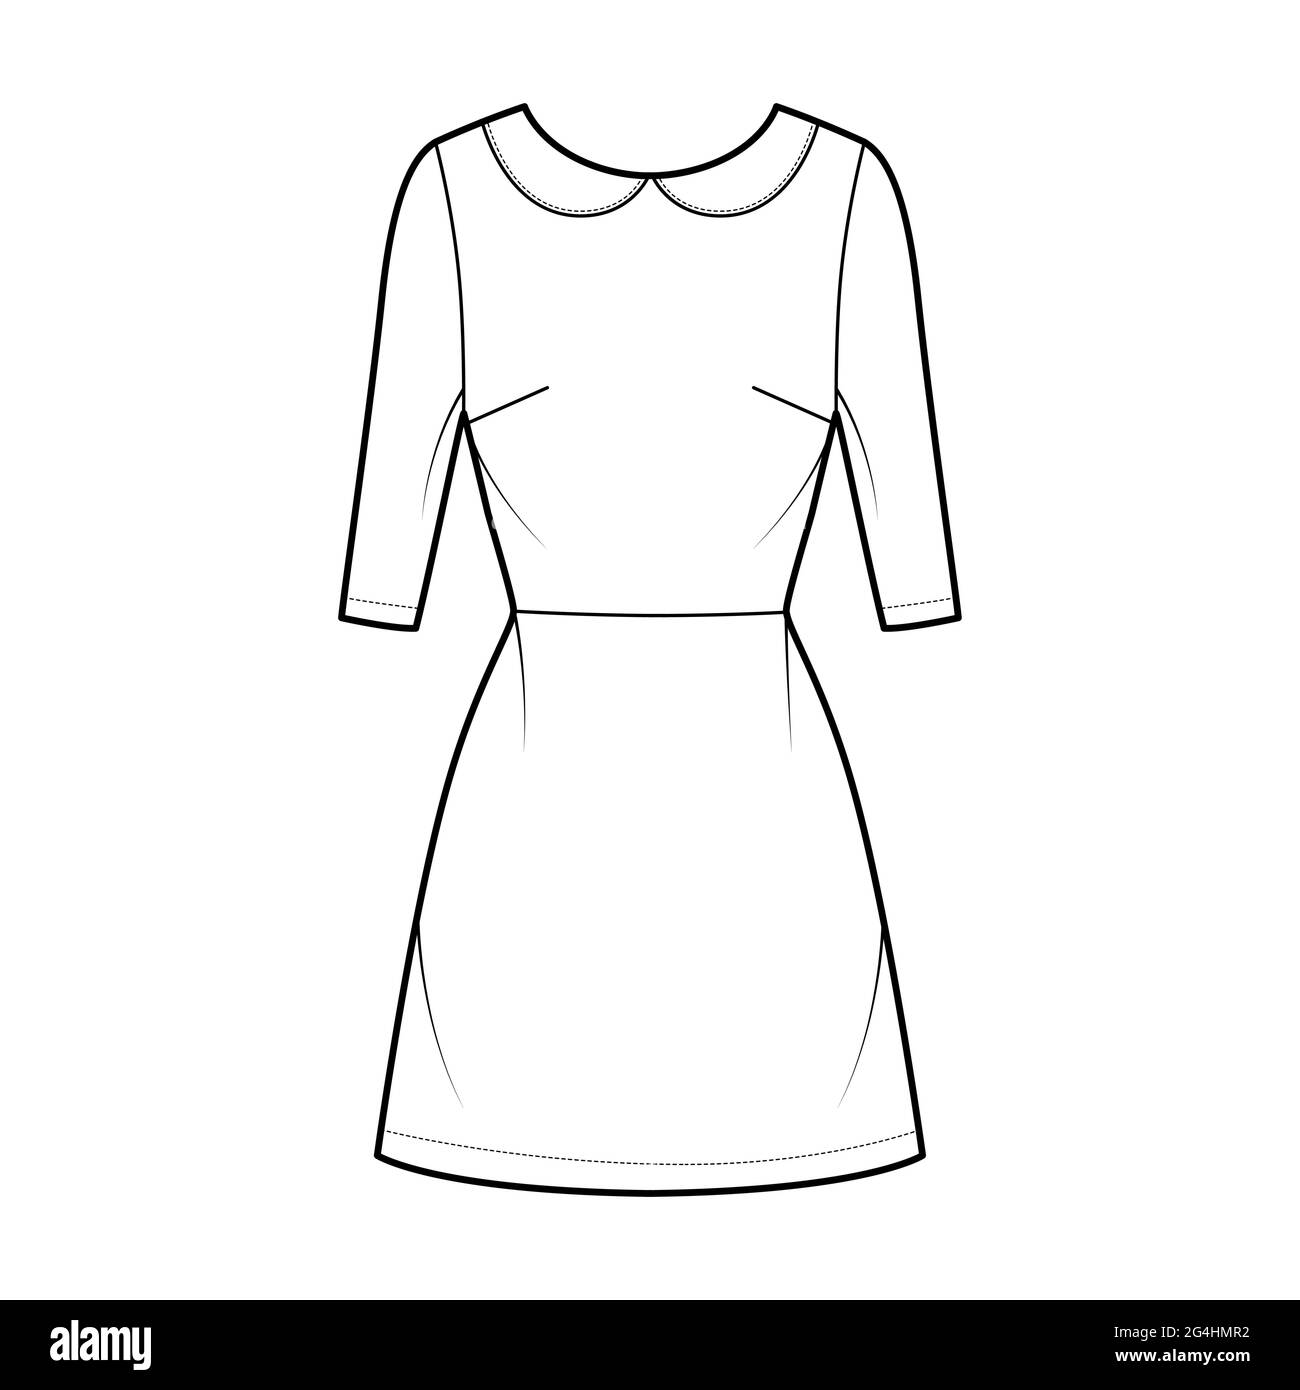 Dress A-line technical fashion illustration with elbow sleeves, peter ...